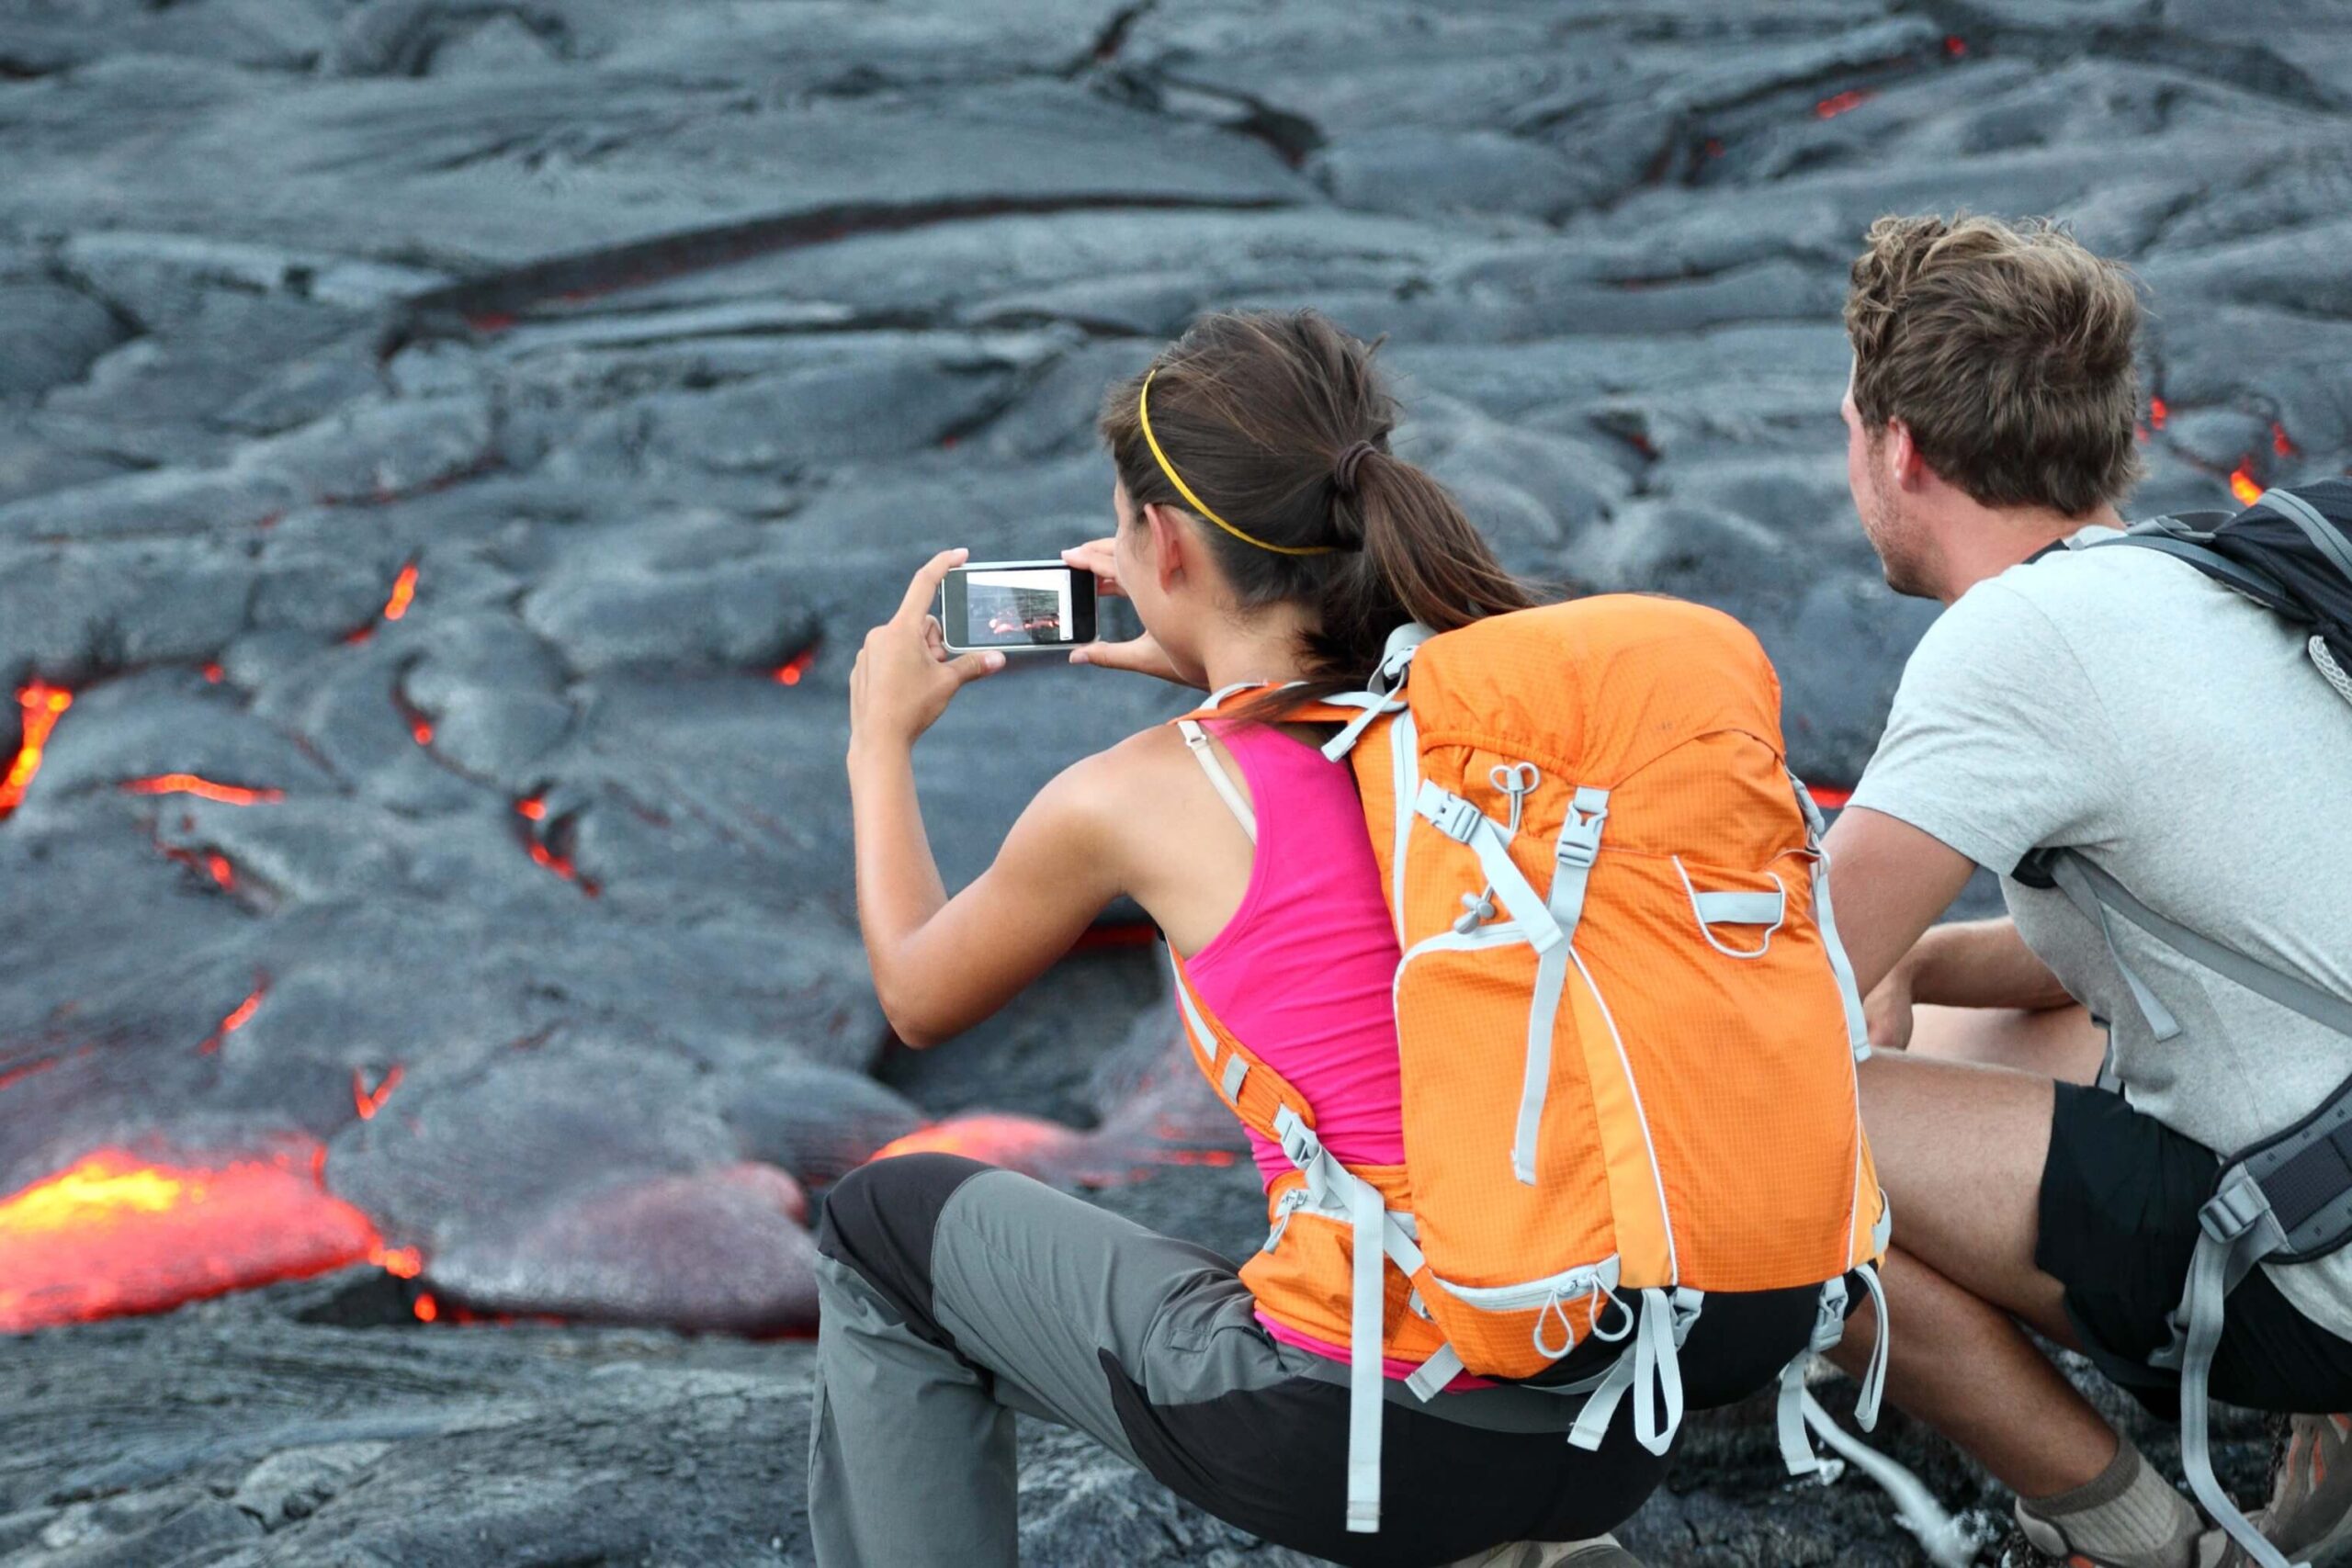 Two people on a Hawaii Volcano Tour.